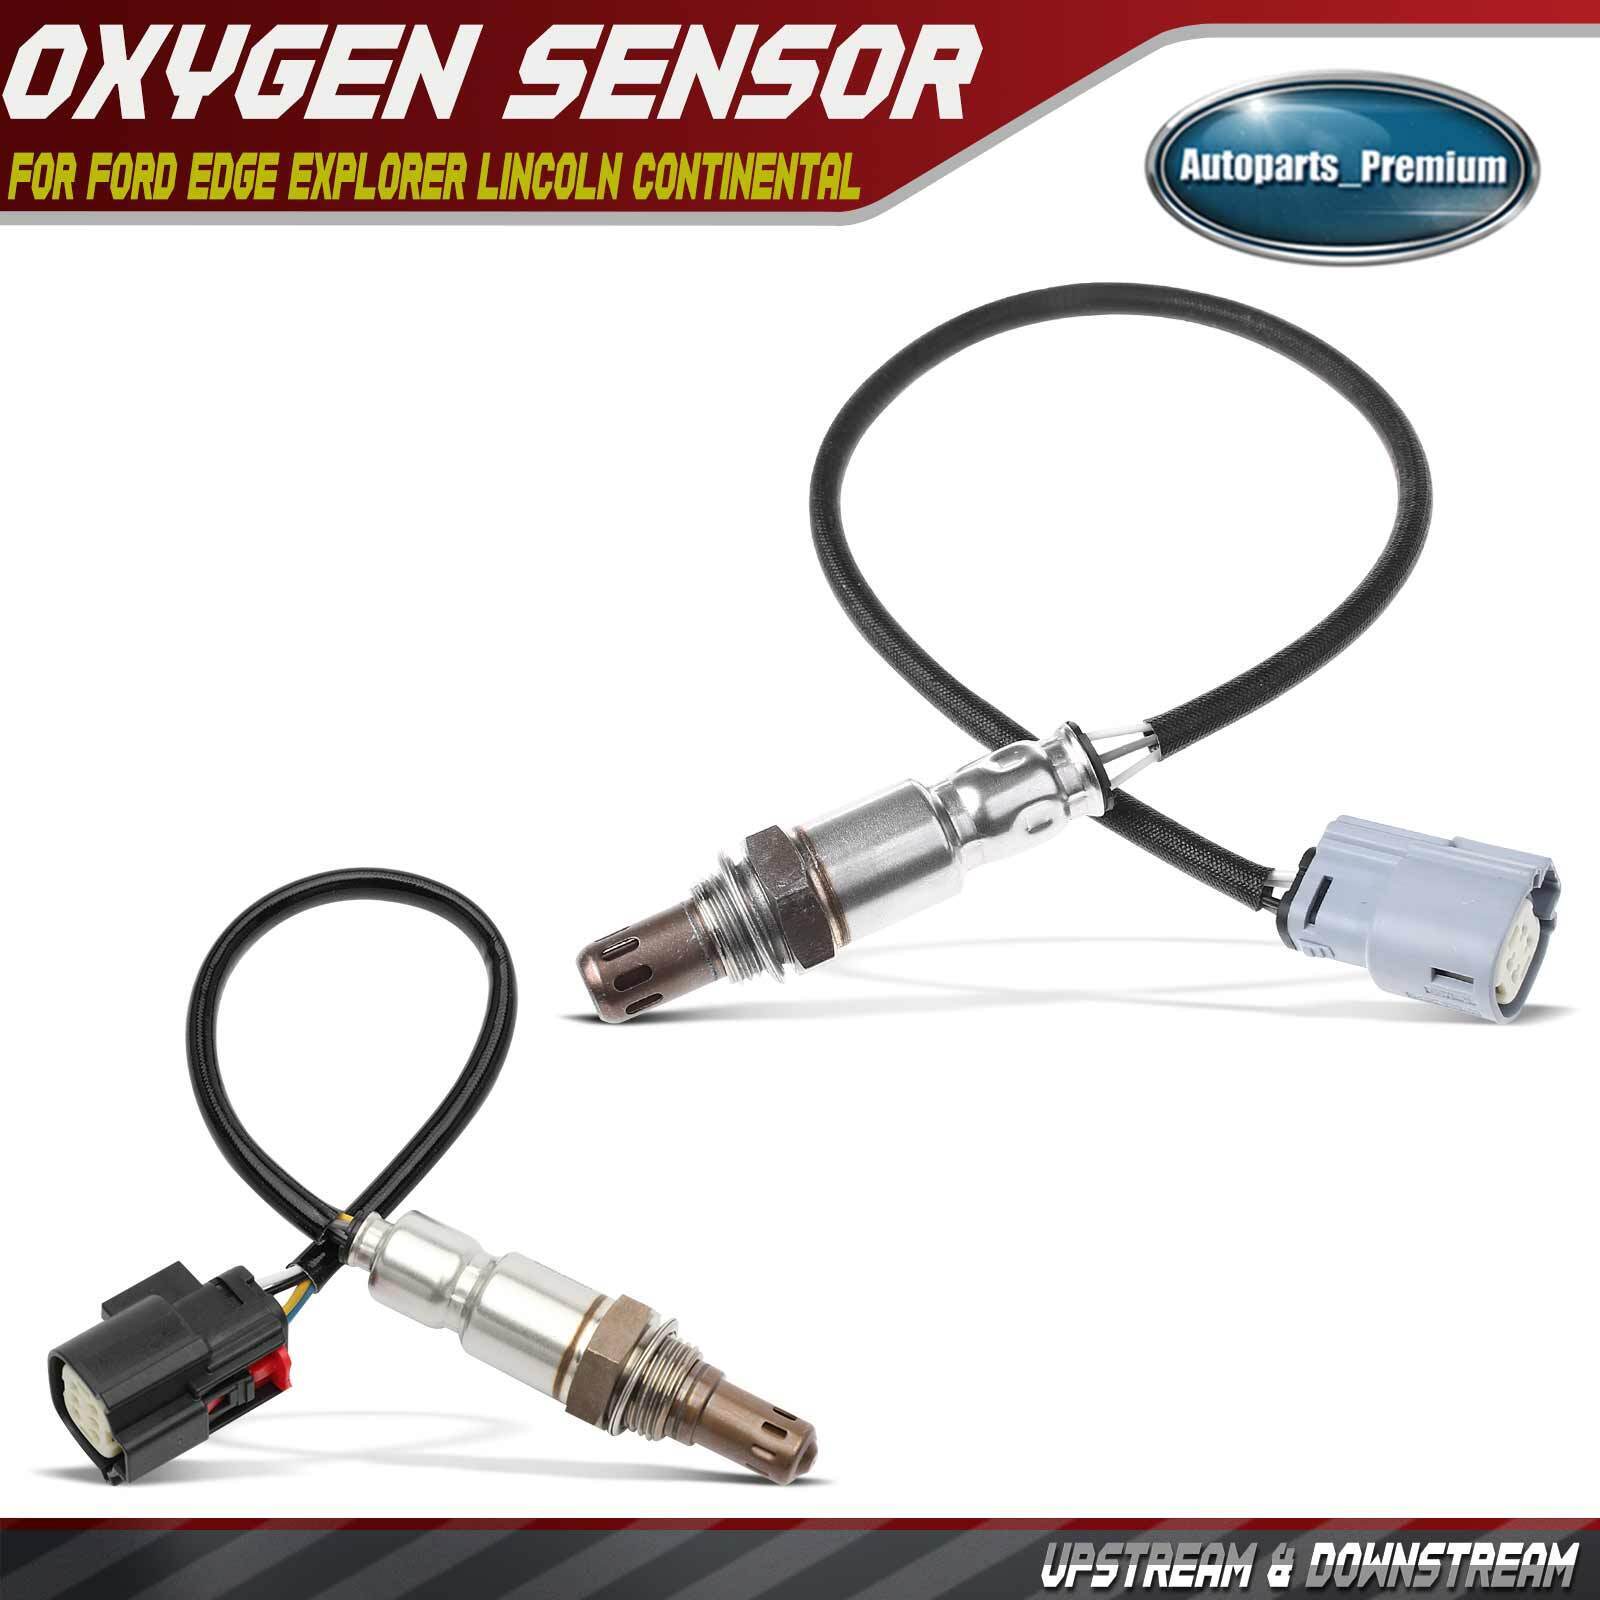 2x Up & Downstream O2 Oxygen Sensor for Ford Edge Explorer Lincoln Continental